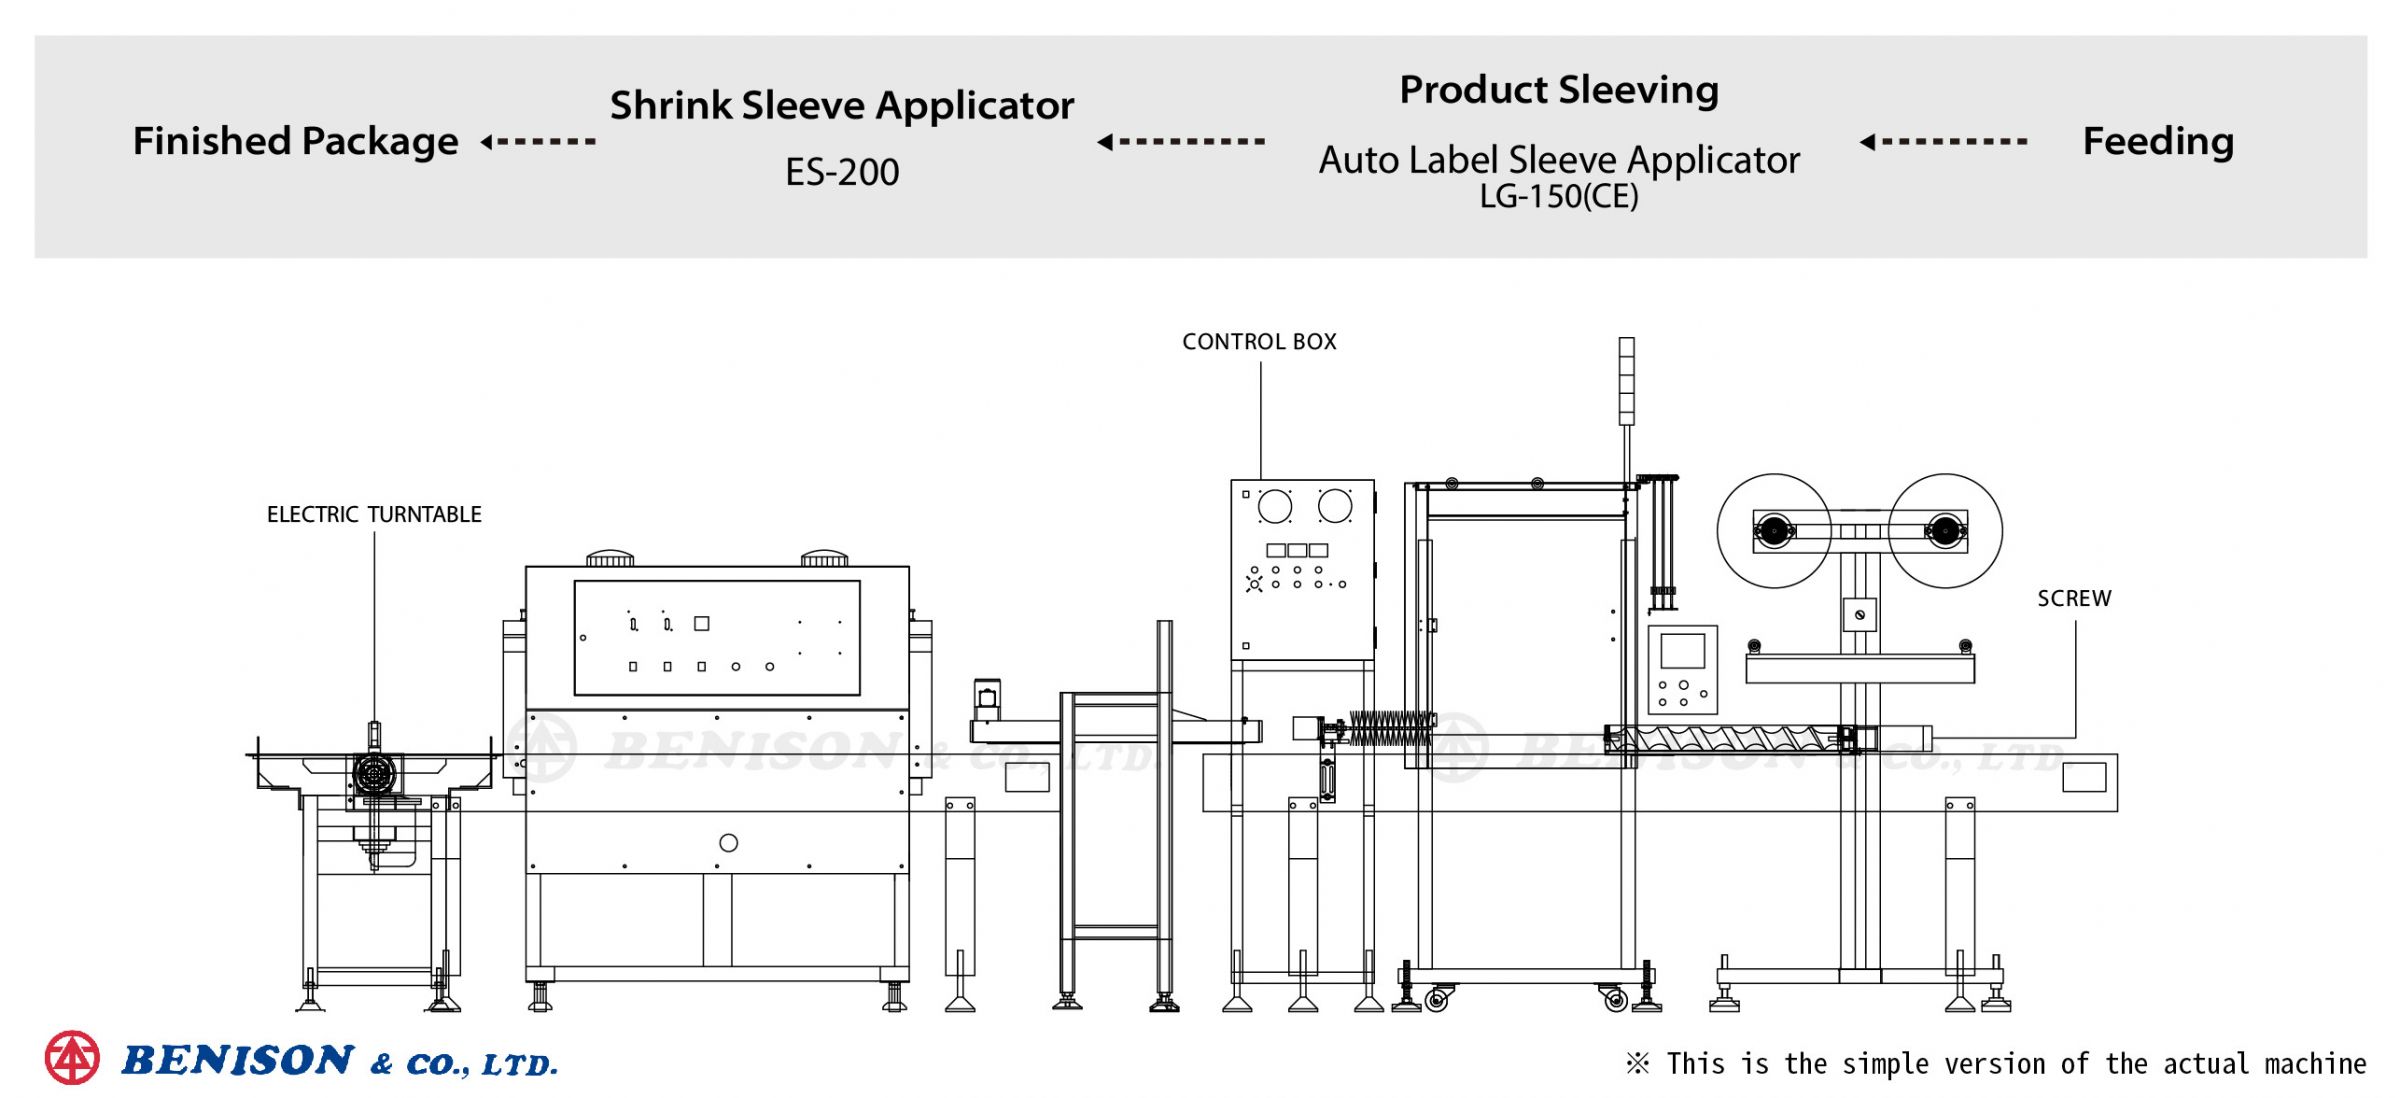 Sleeving Machine LG-150CE + Heat Tunnel ES-200 for Twin pack bottle from New Zealand